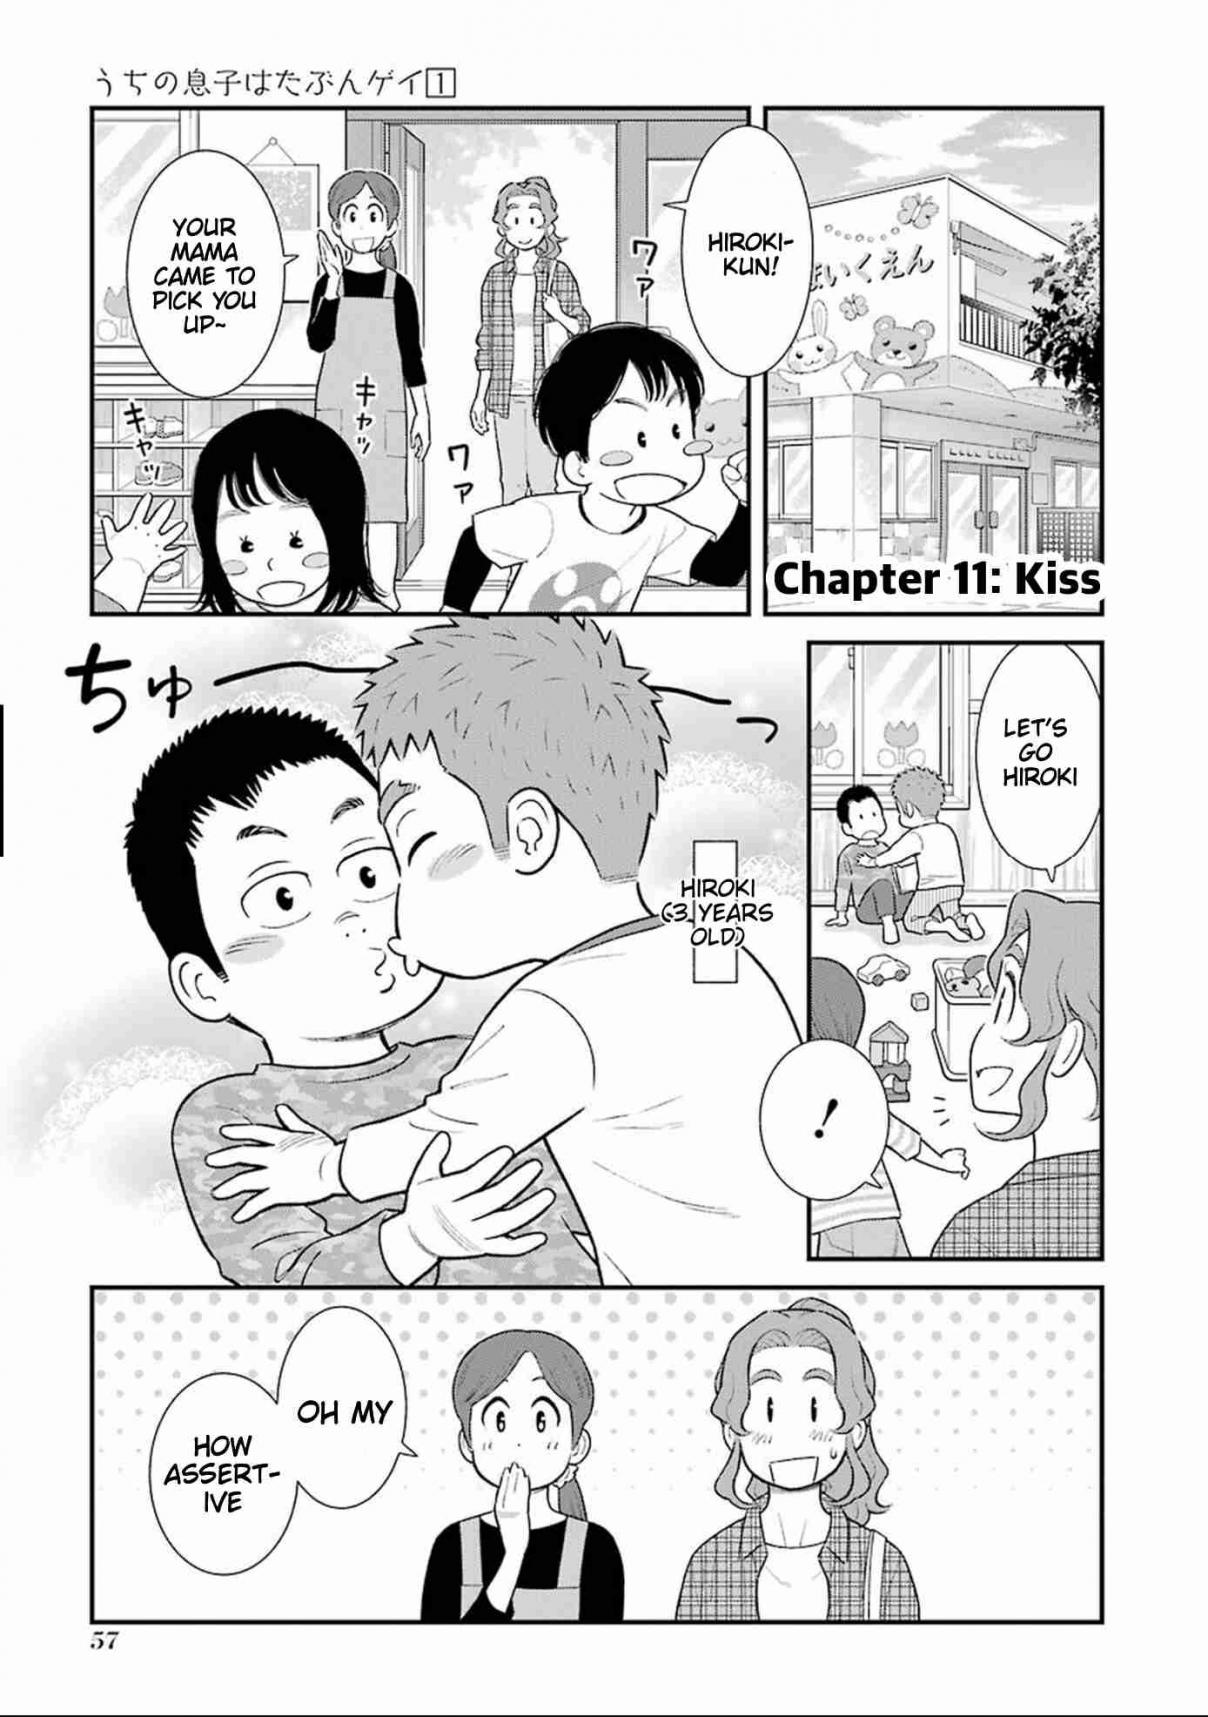 My Son Is Probably Gay Vol. 1 Ch. 11 Kiss